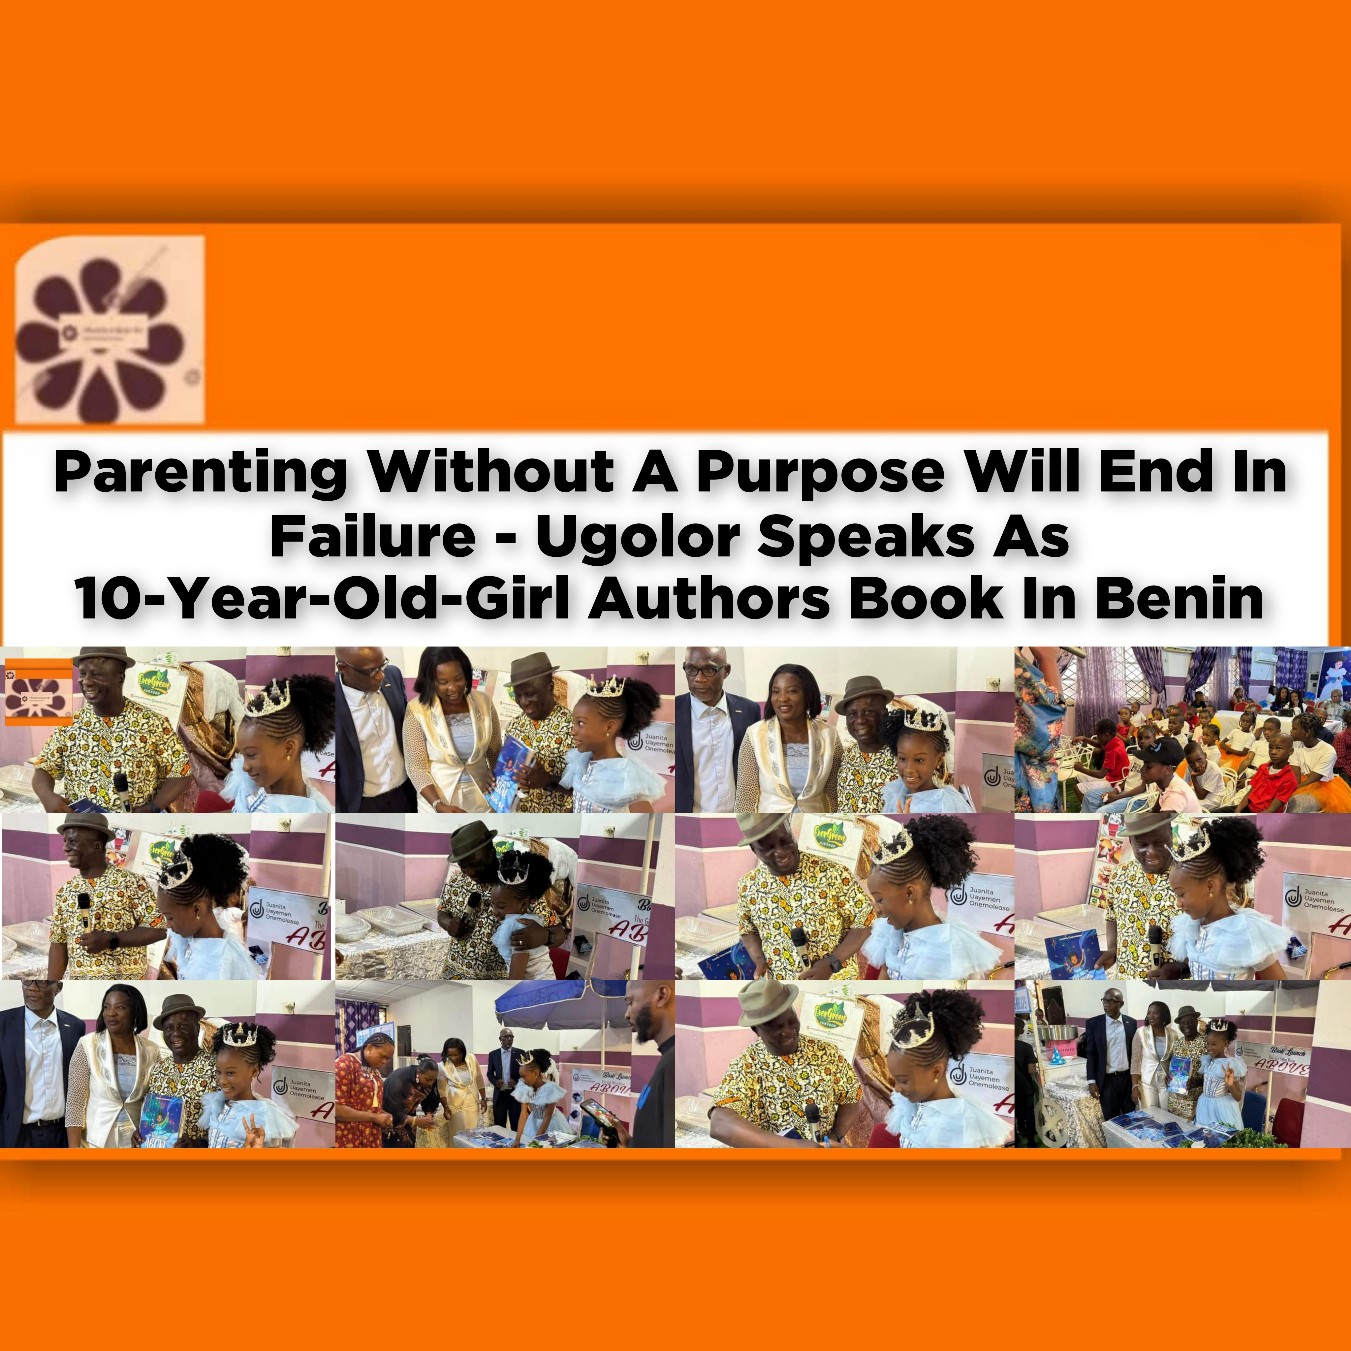 Parenting Without A Purpose Will End In Failure - Ugolor Speaks As 10-Year-Old-Girl Authors Book In Benin ~ OsazuwaAkonedo #Adeleke